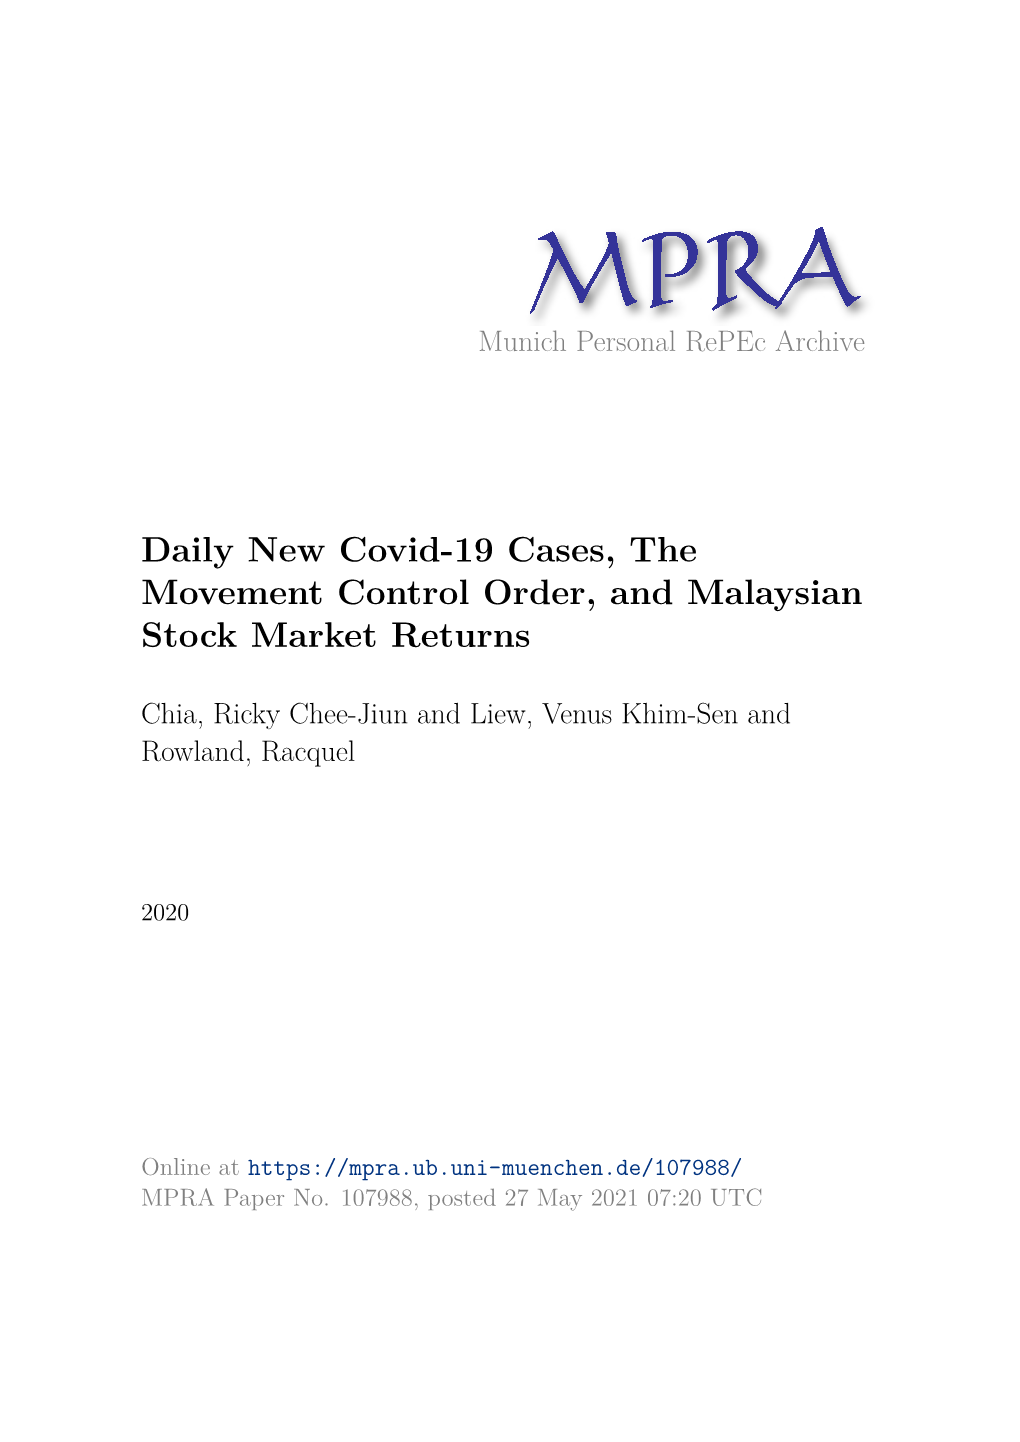 Daily New Covid-19 Cases, the Movement Control Order, and Malaysian Stock Market Returns